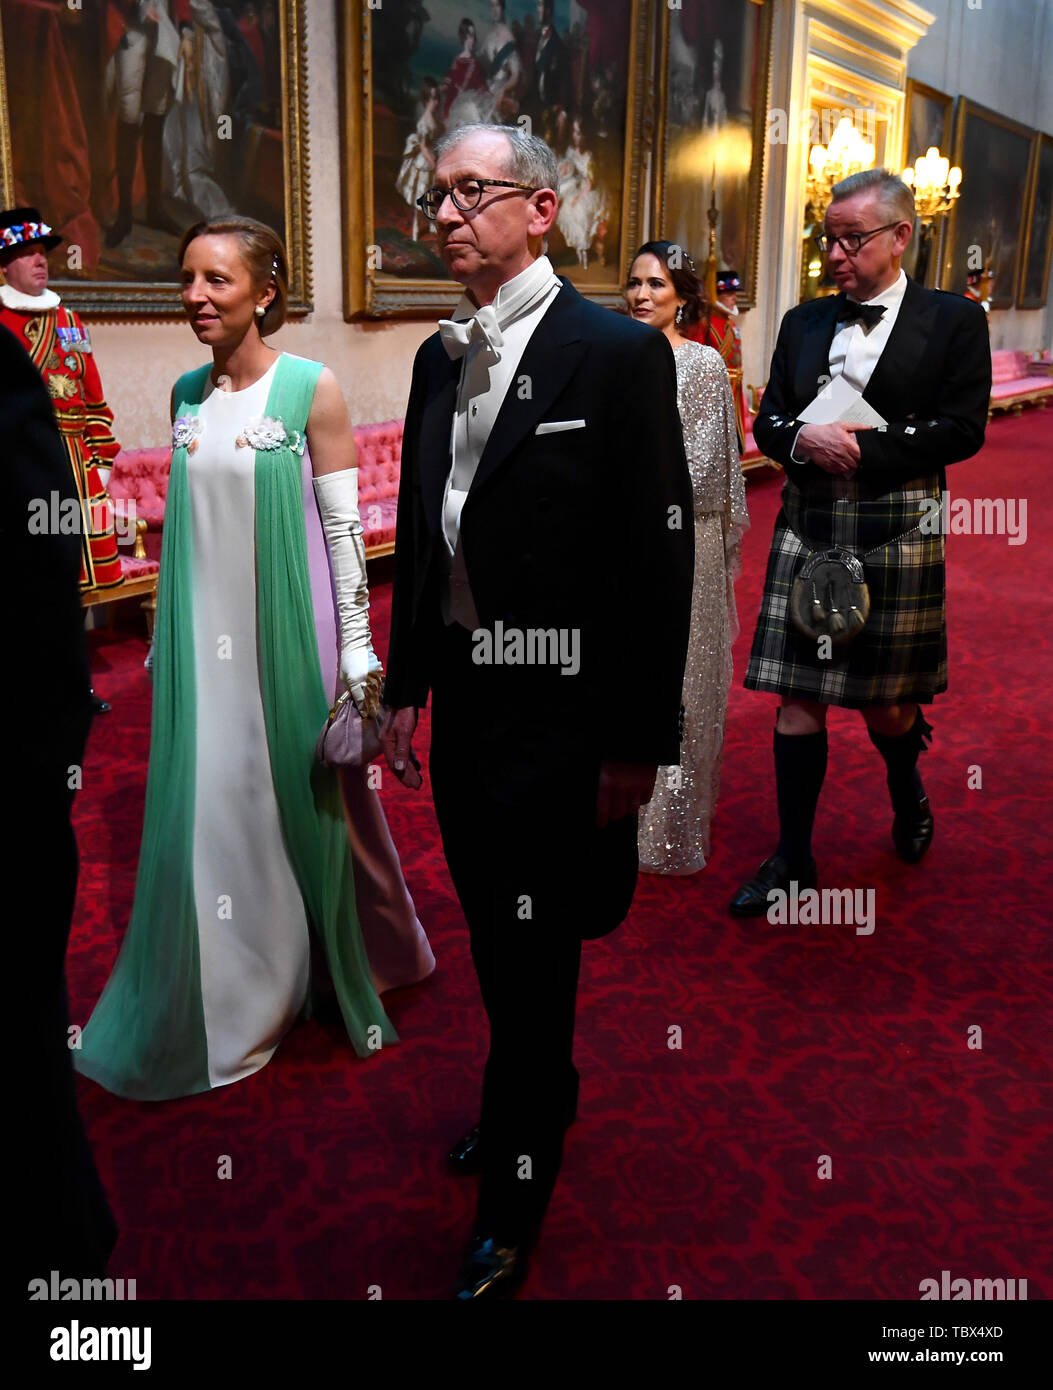 Lindsay Reynolds and the Prime Minister's husband Philip May arrive through the East Gallery during the State Banquet at Buckingham Palace, London, on day one of the US President's three day state visit to the UK. Stock Photo